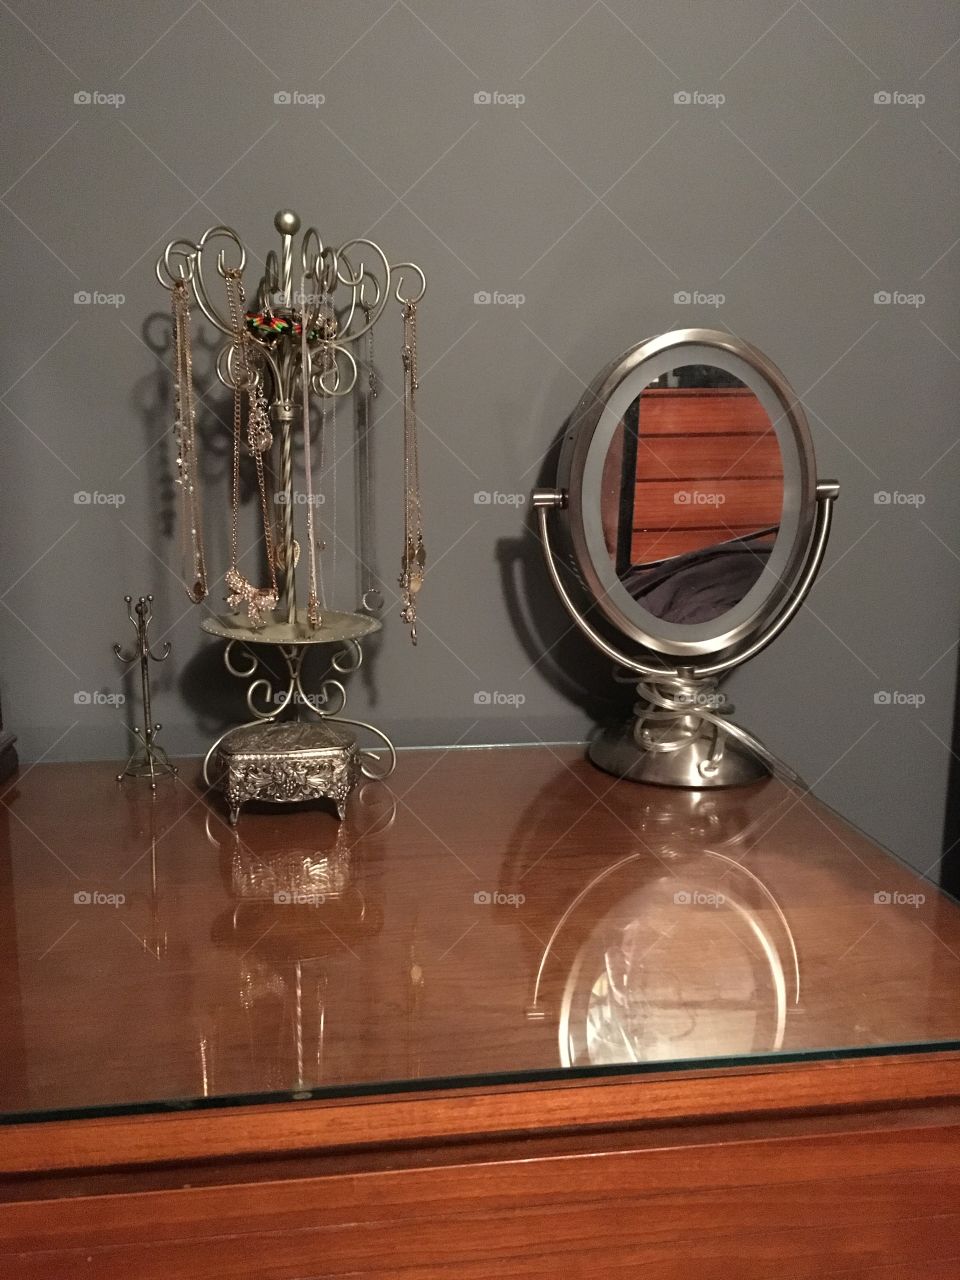 Jewelry and mirror in dresser